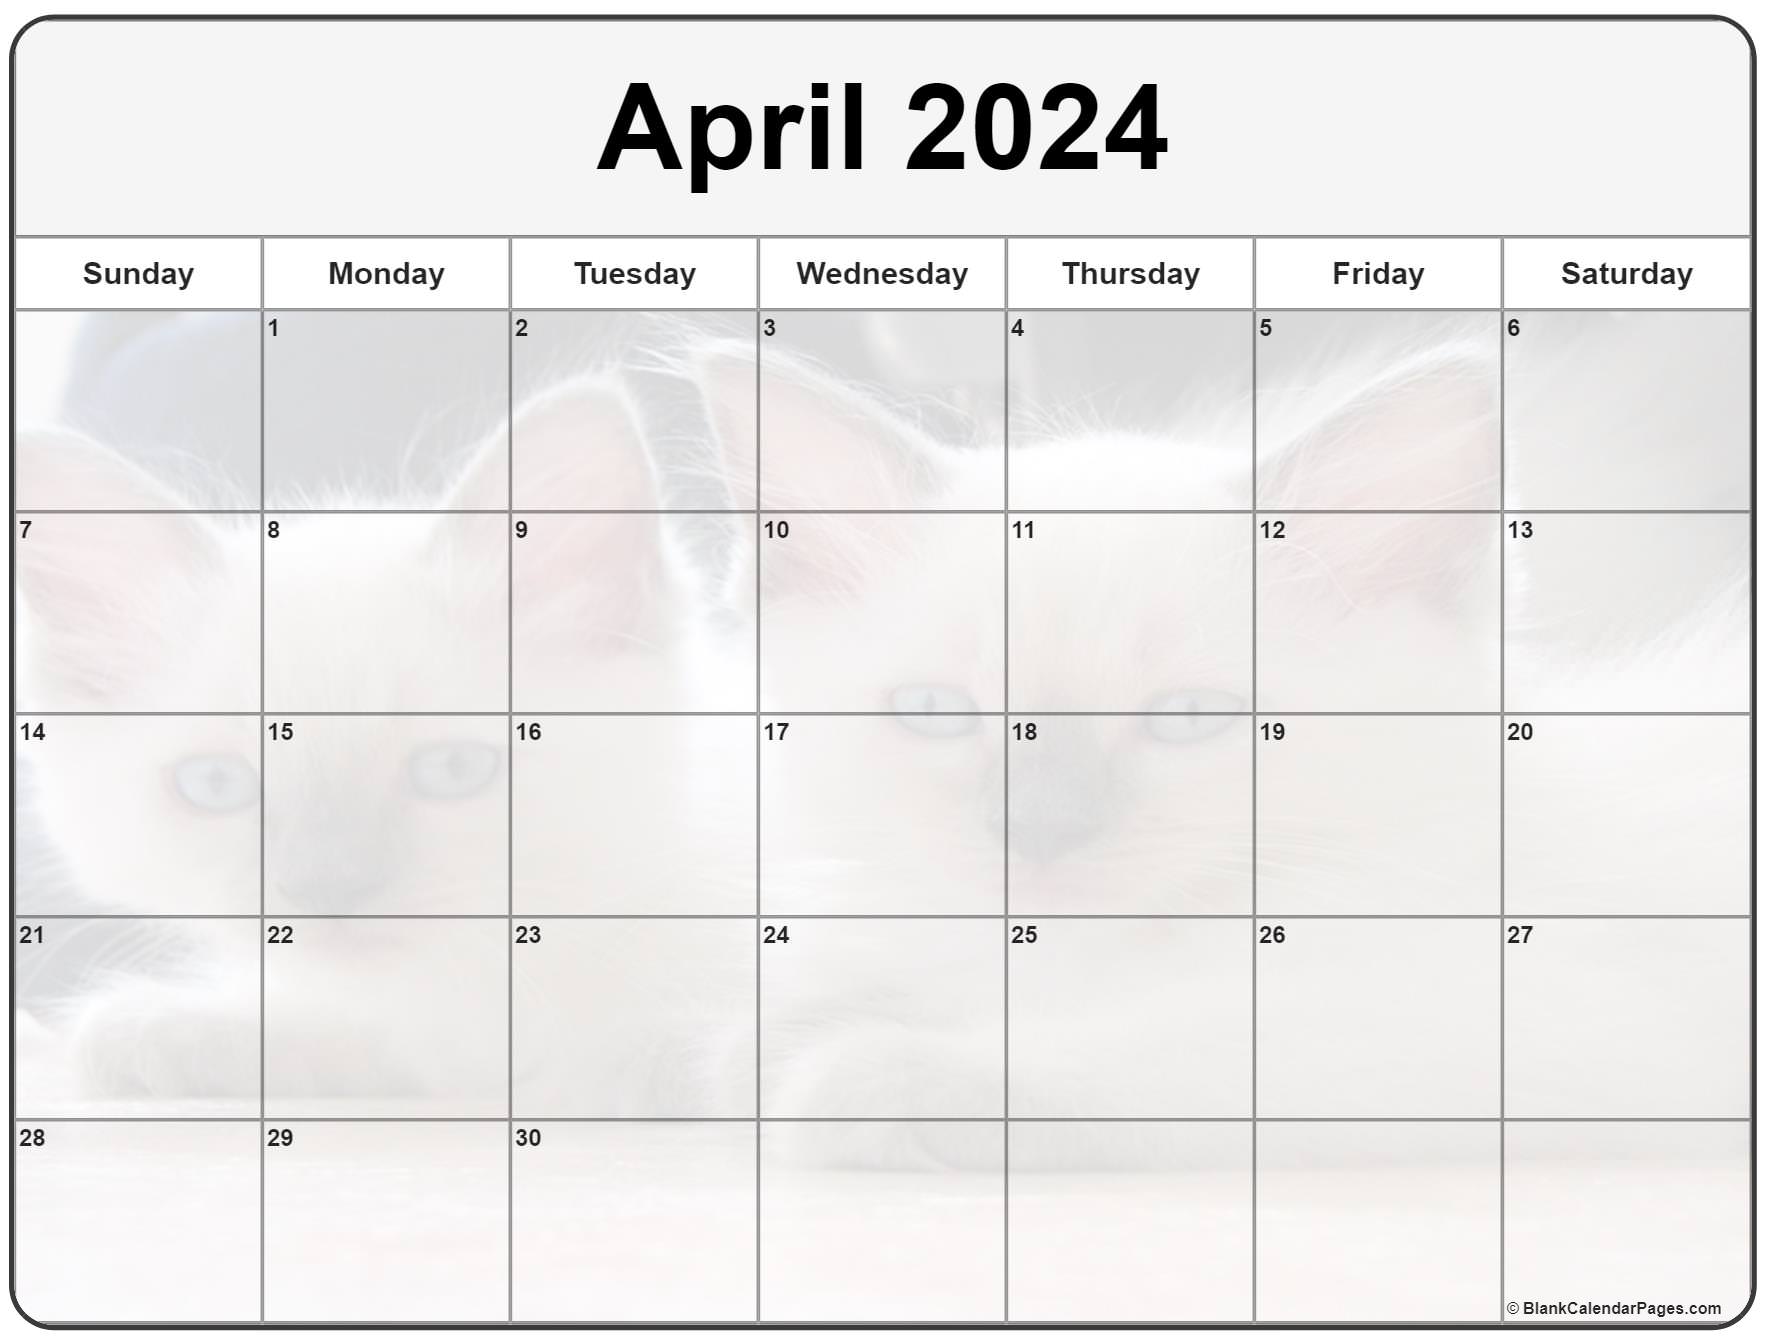 Collection of April 2022 photo calendars with image filters.